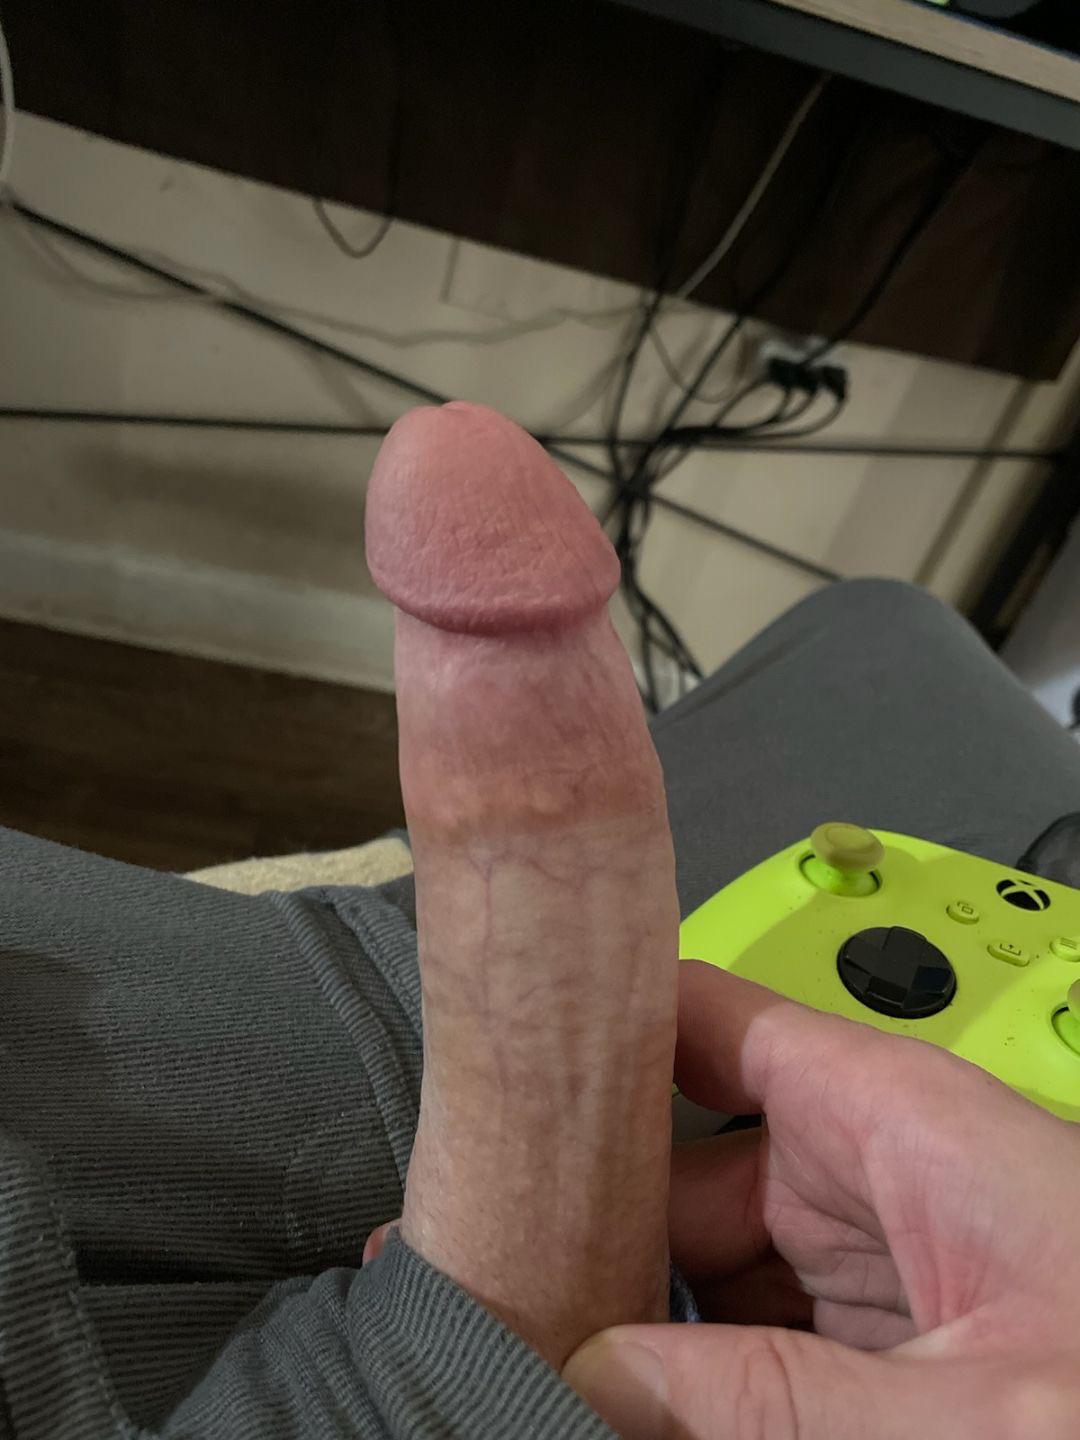 Wife 26f just got done with her bull, she came home and made me use my picture